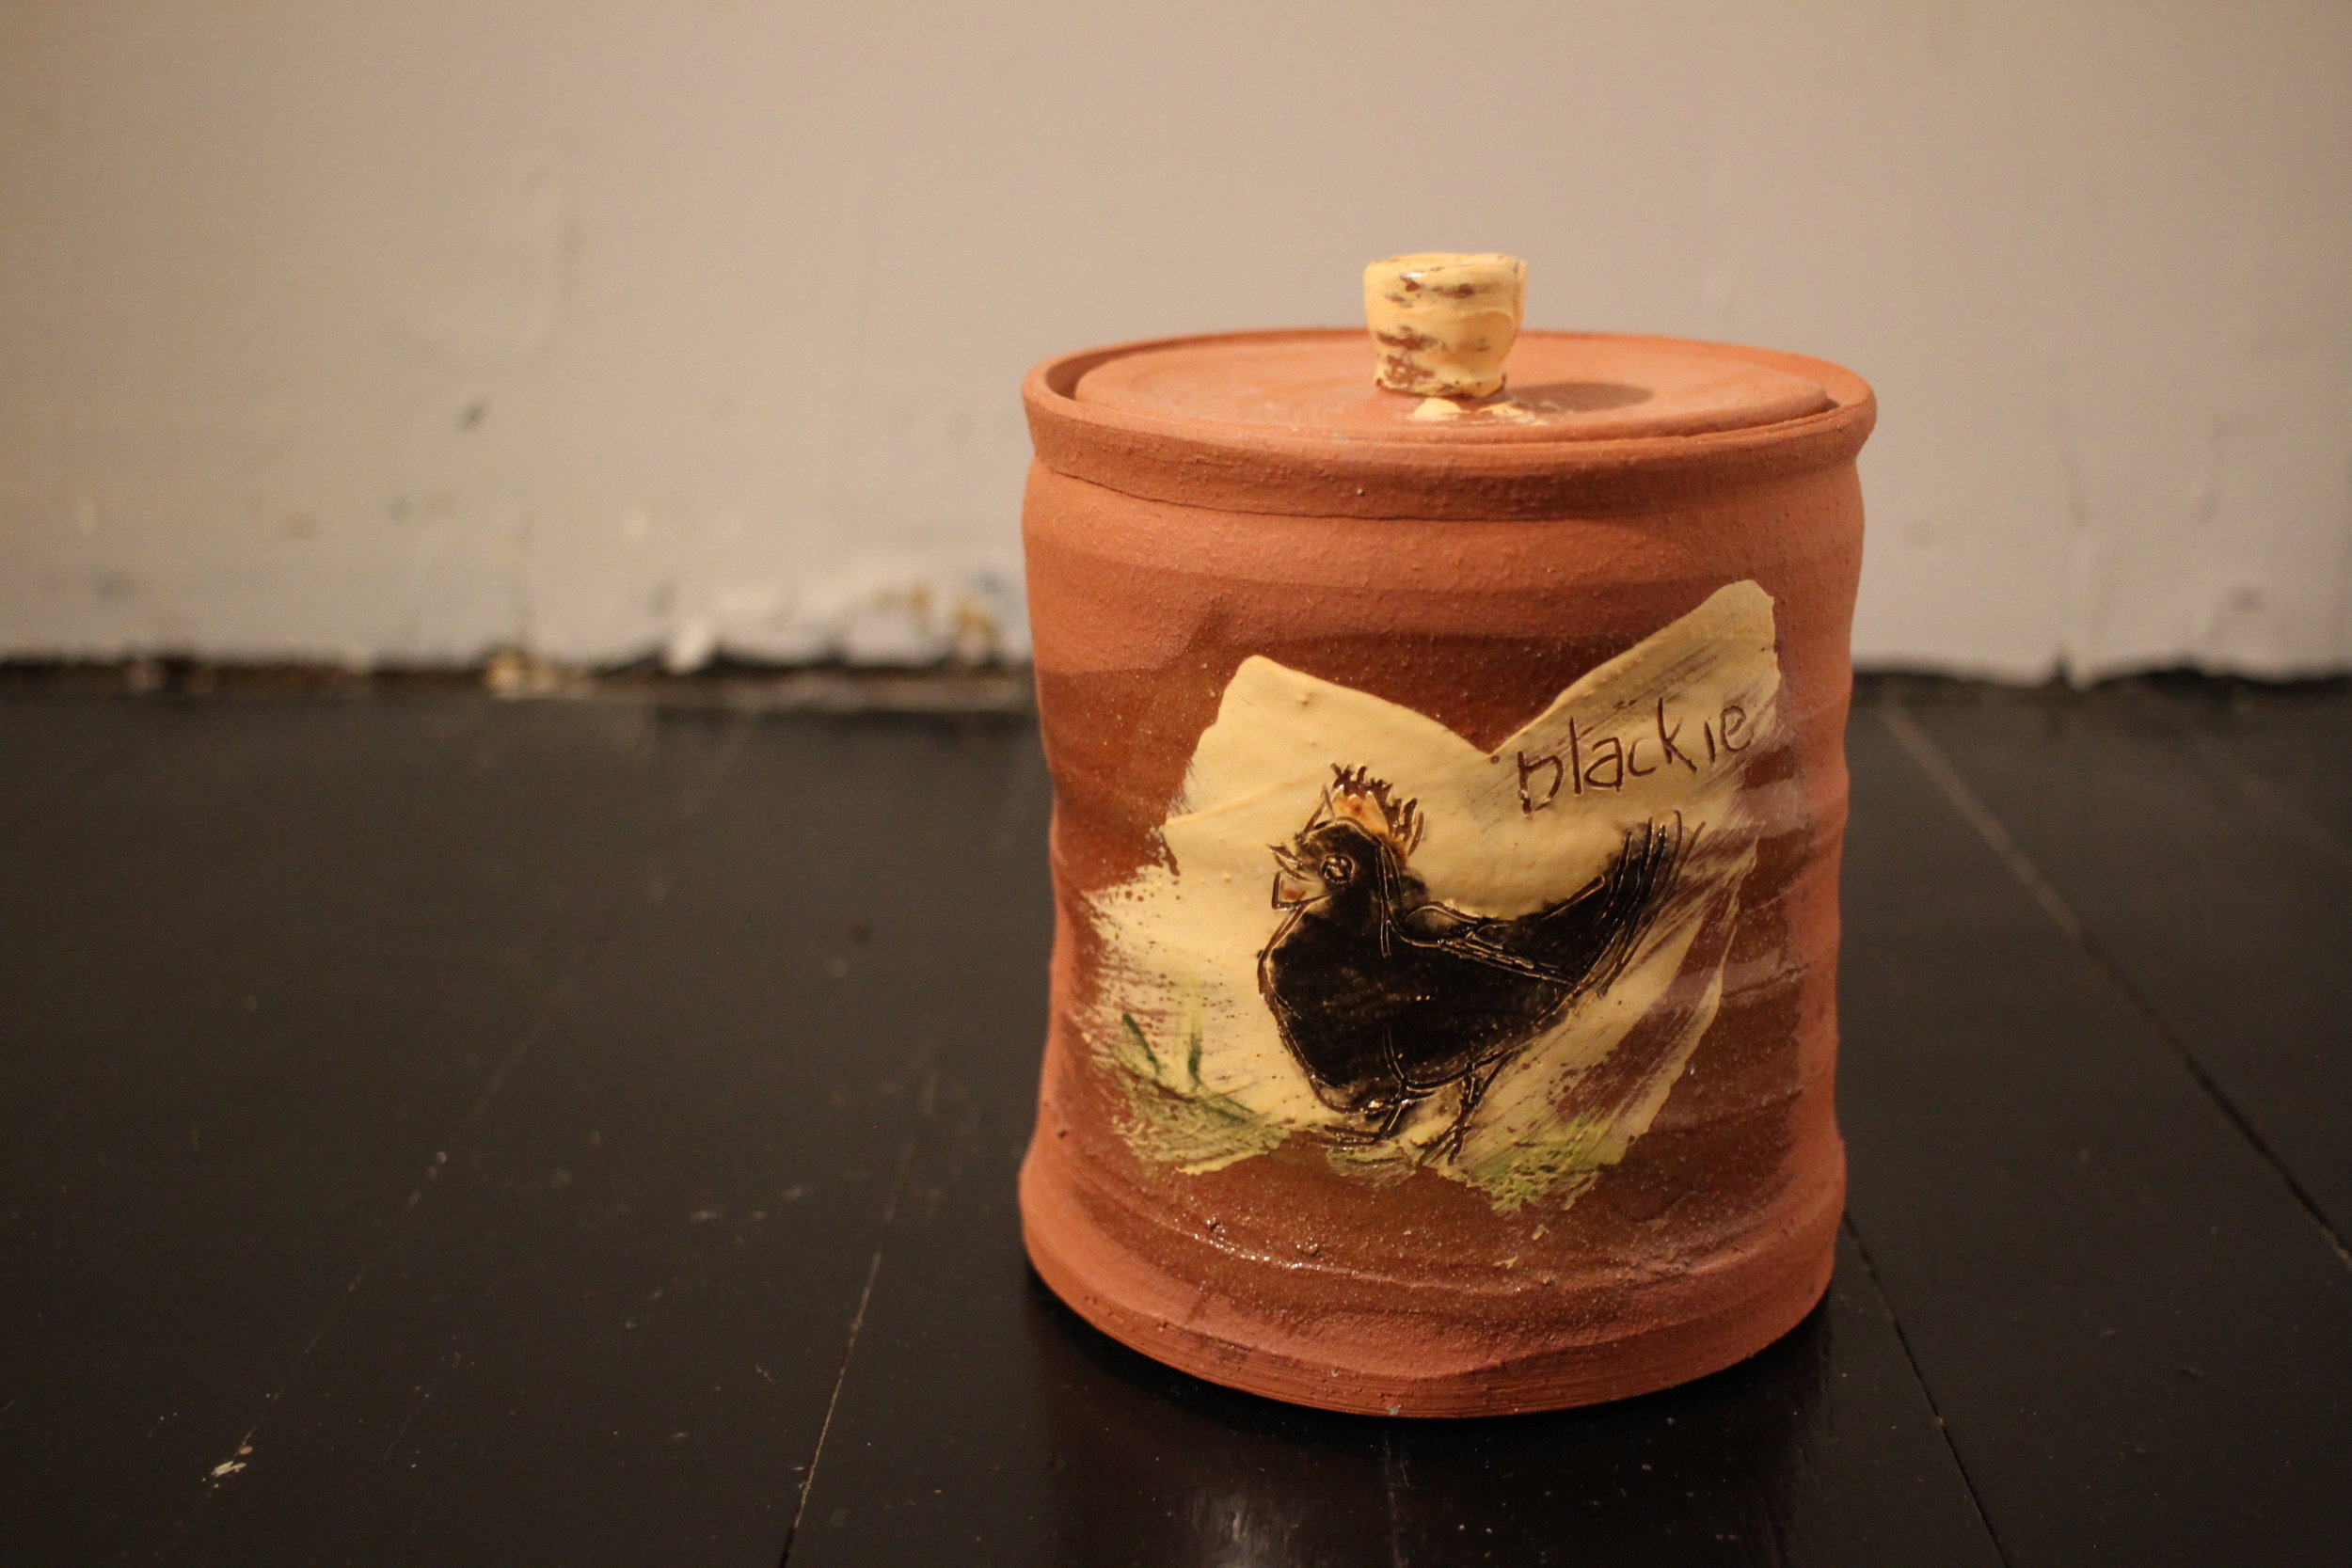 Chicken Cannister ("Blackie")